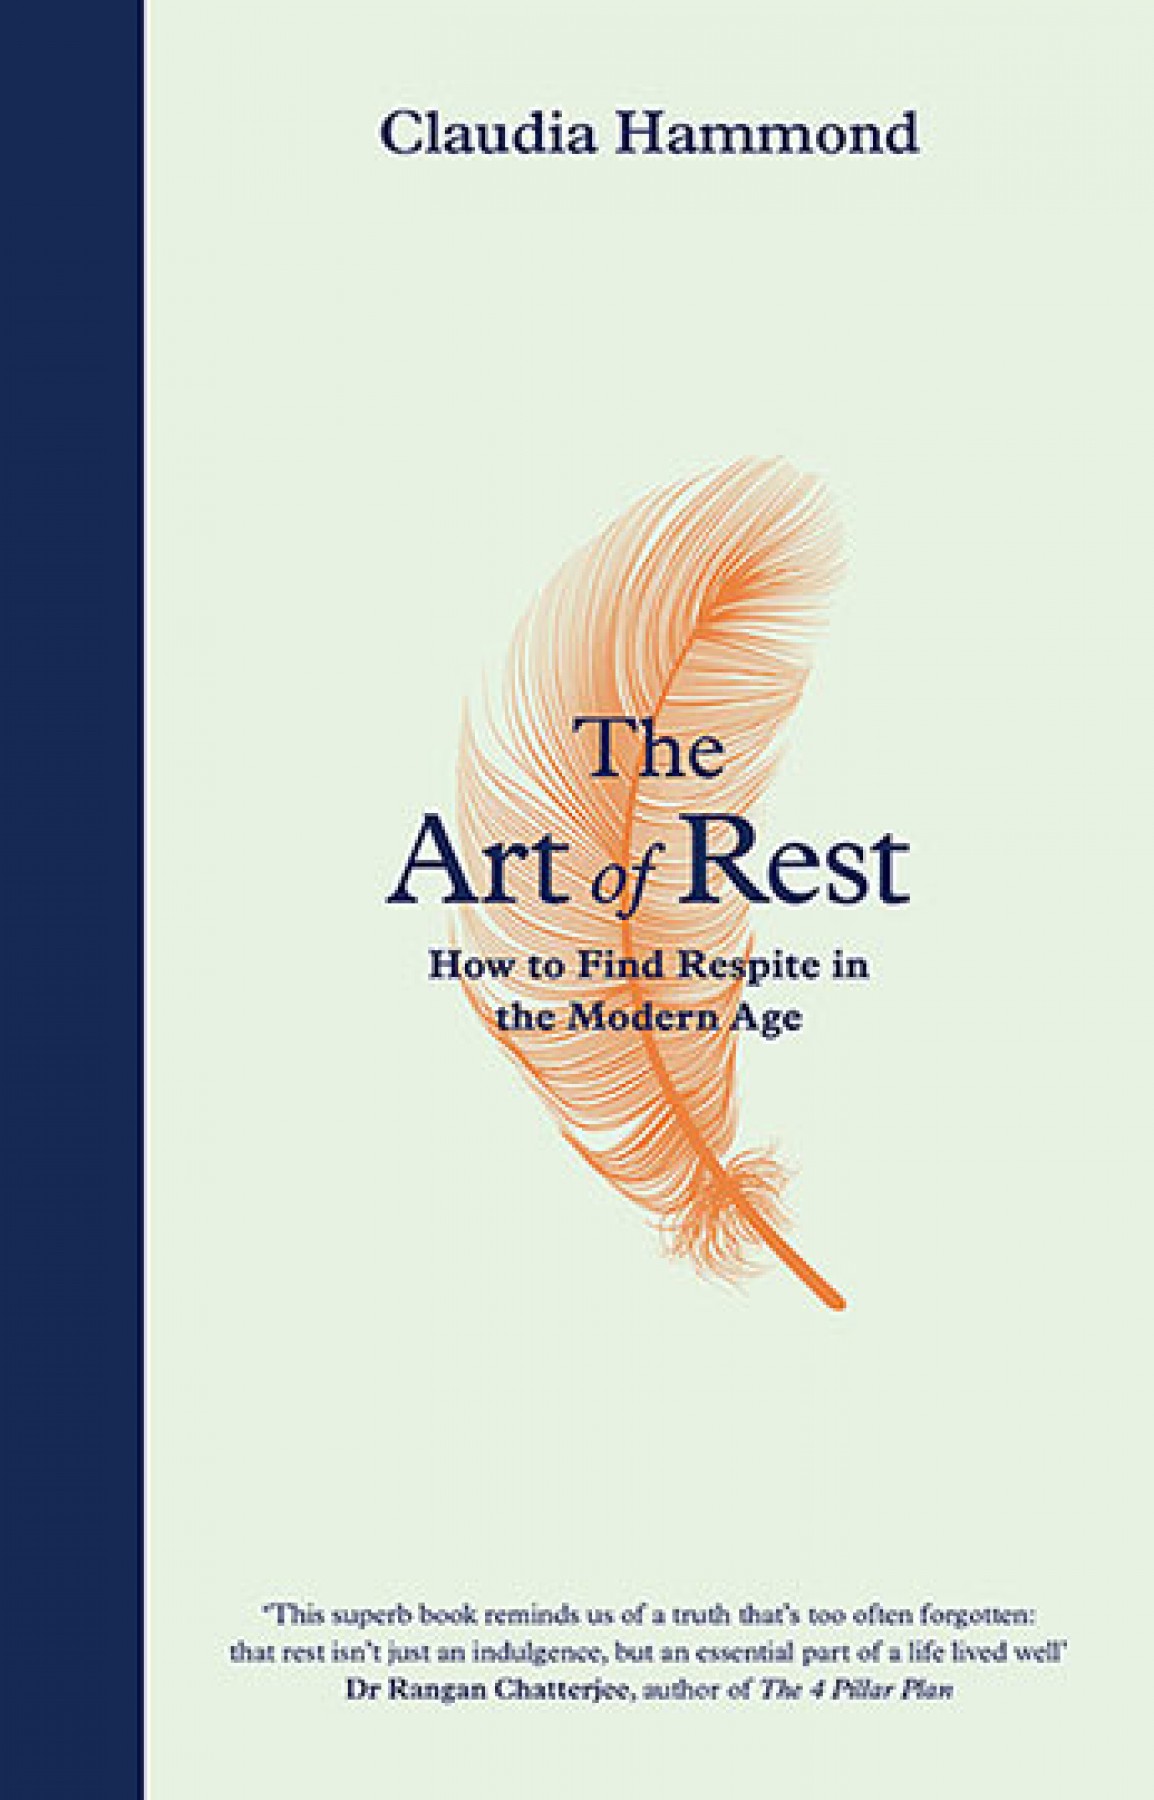 The art of rest: How to find respite in the modern age